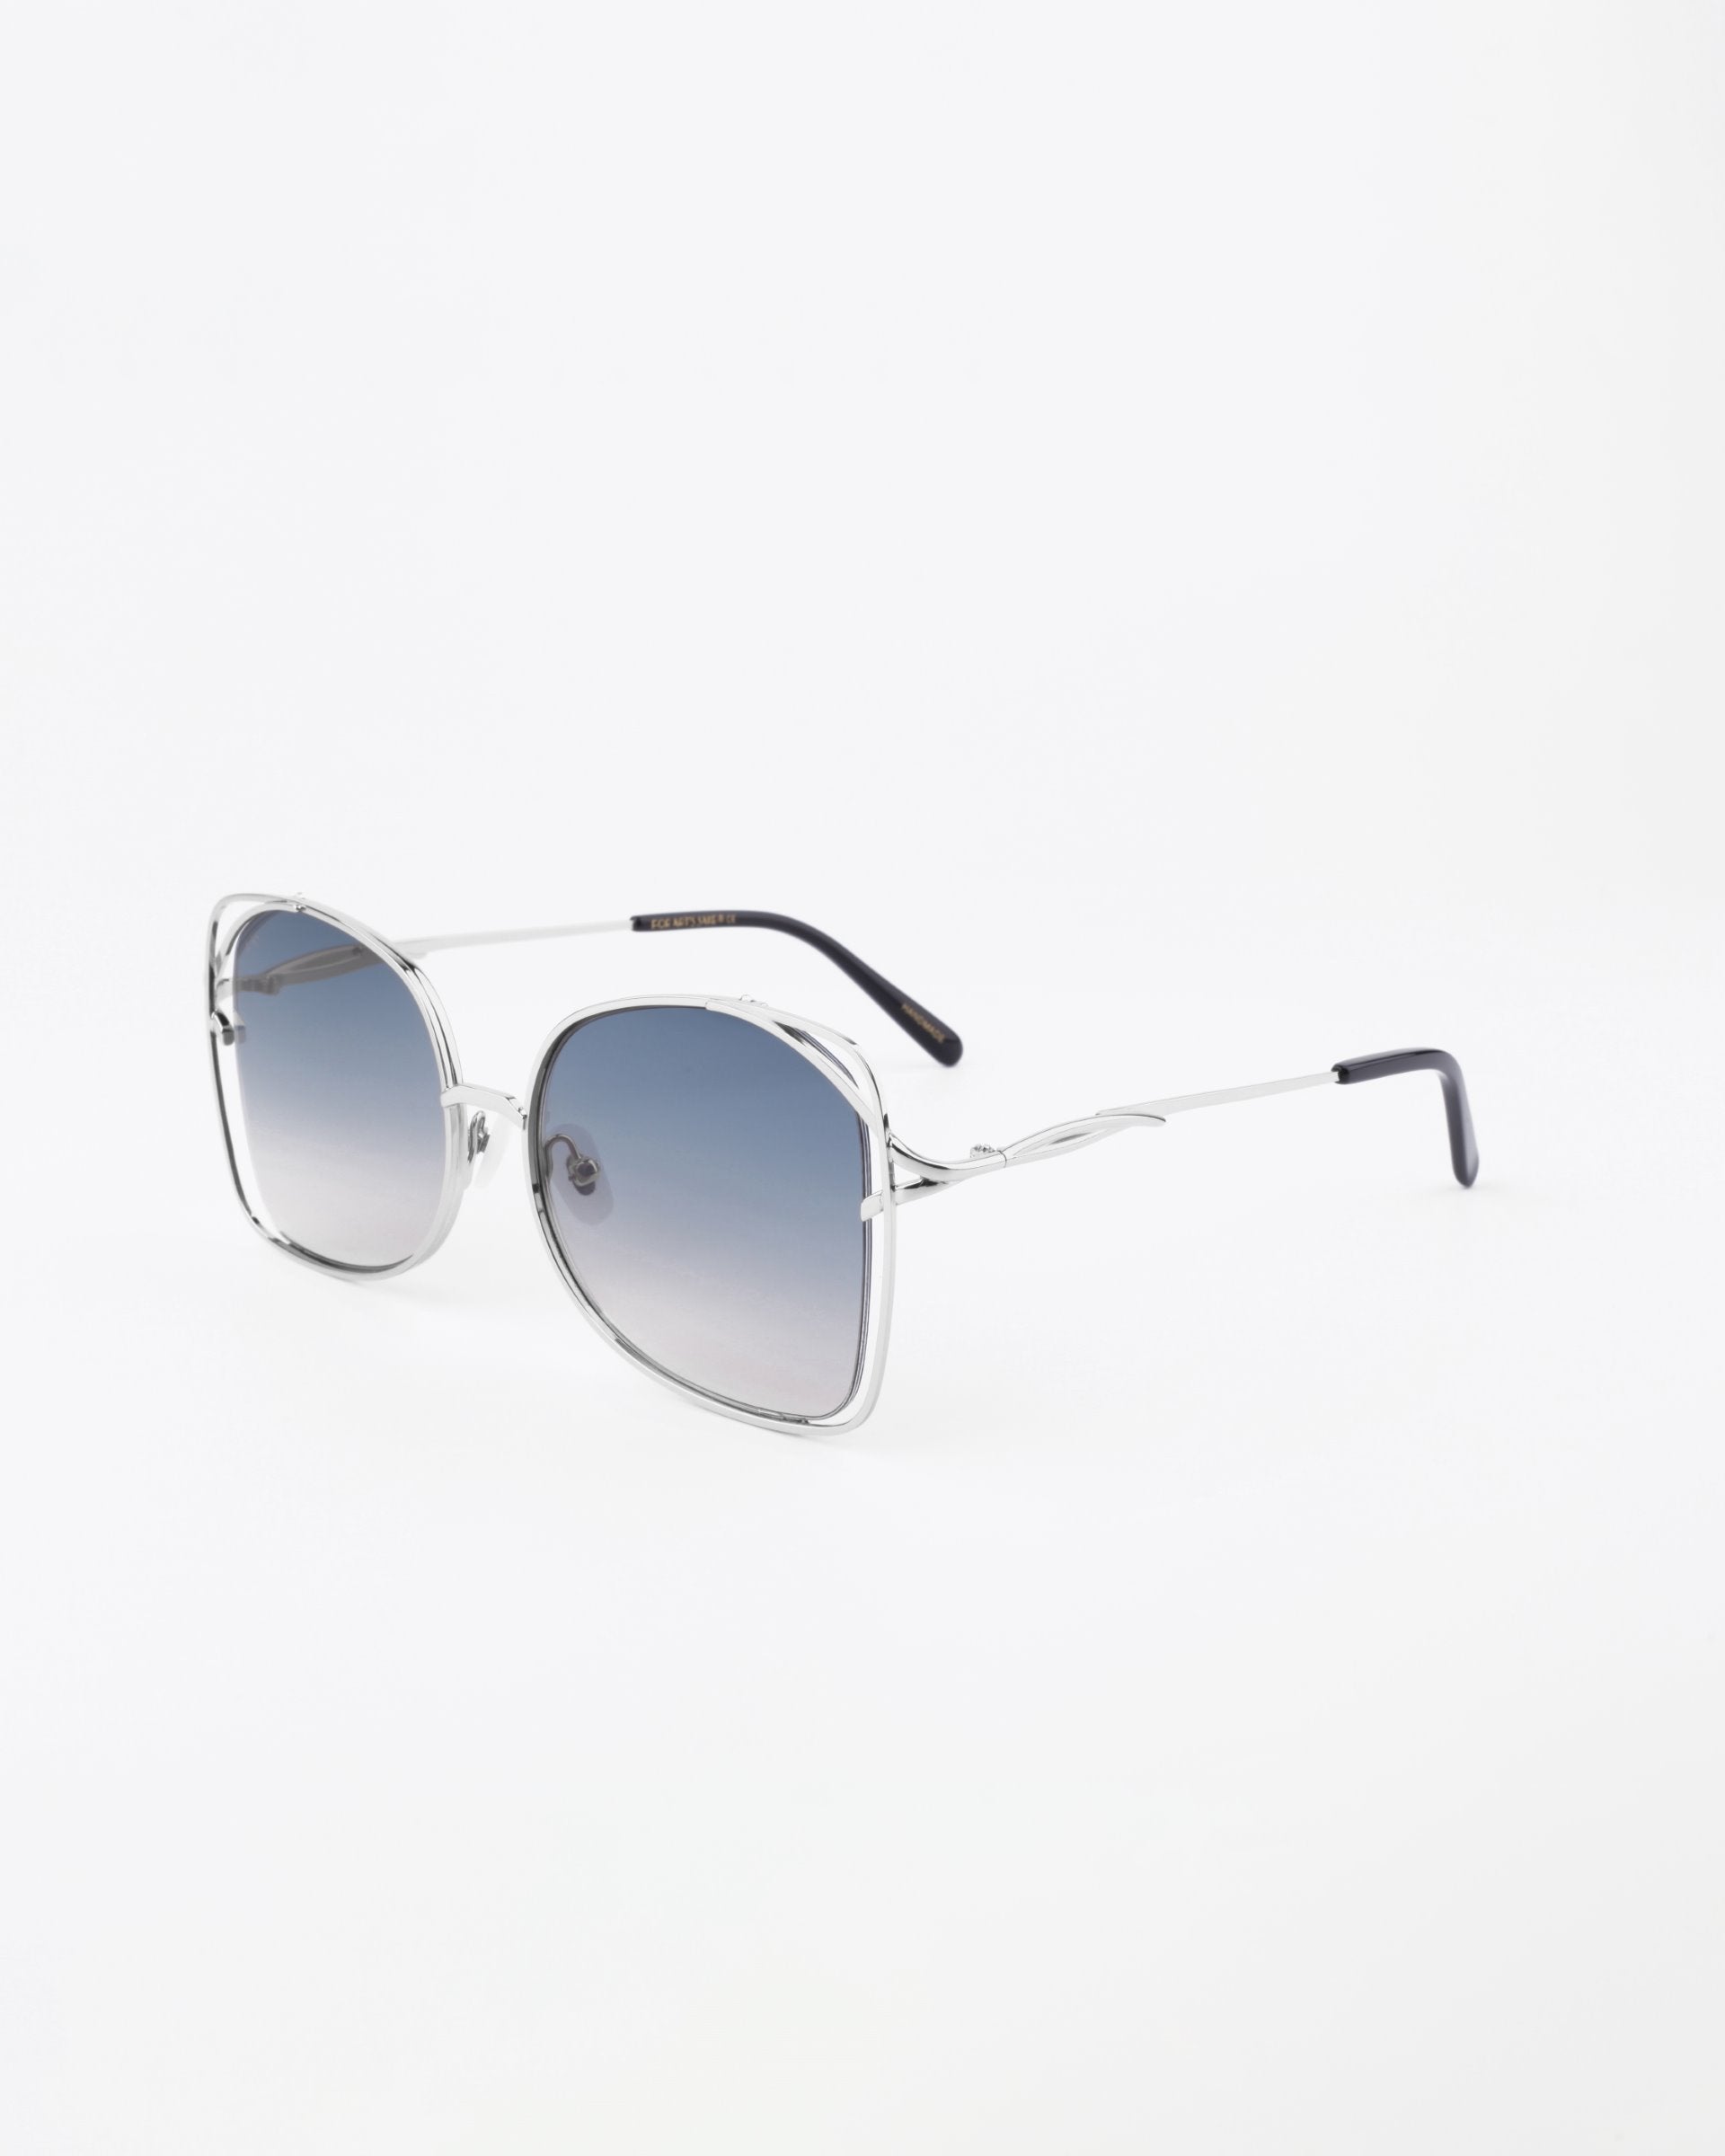 A pair of stylish handmade sunglasses, Carousel by For Art&#39;s Sake®, with shatter-resistant, large rounded square blue gradient lenses and thin temples that extend into black tips. The silver metal frame adds a sophisticated touch against the plain white background.